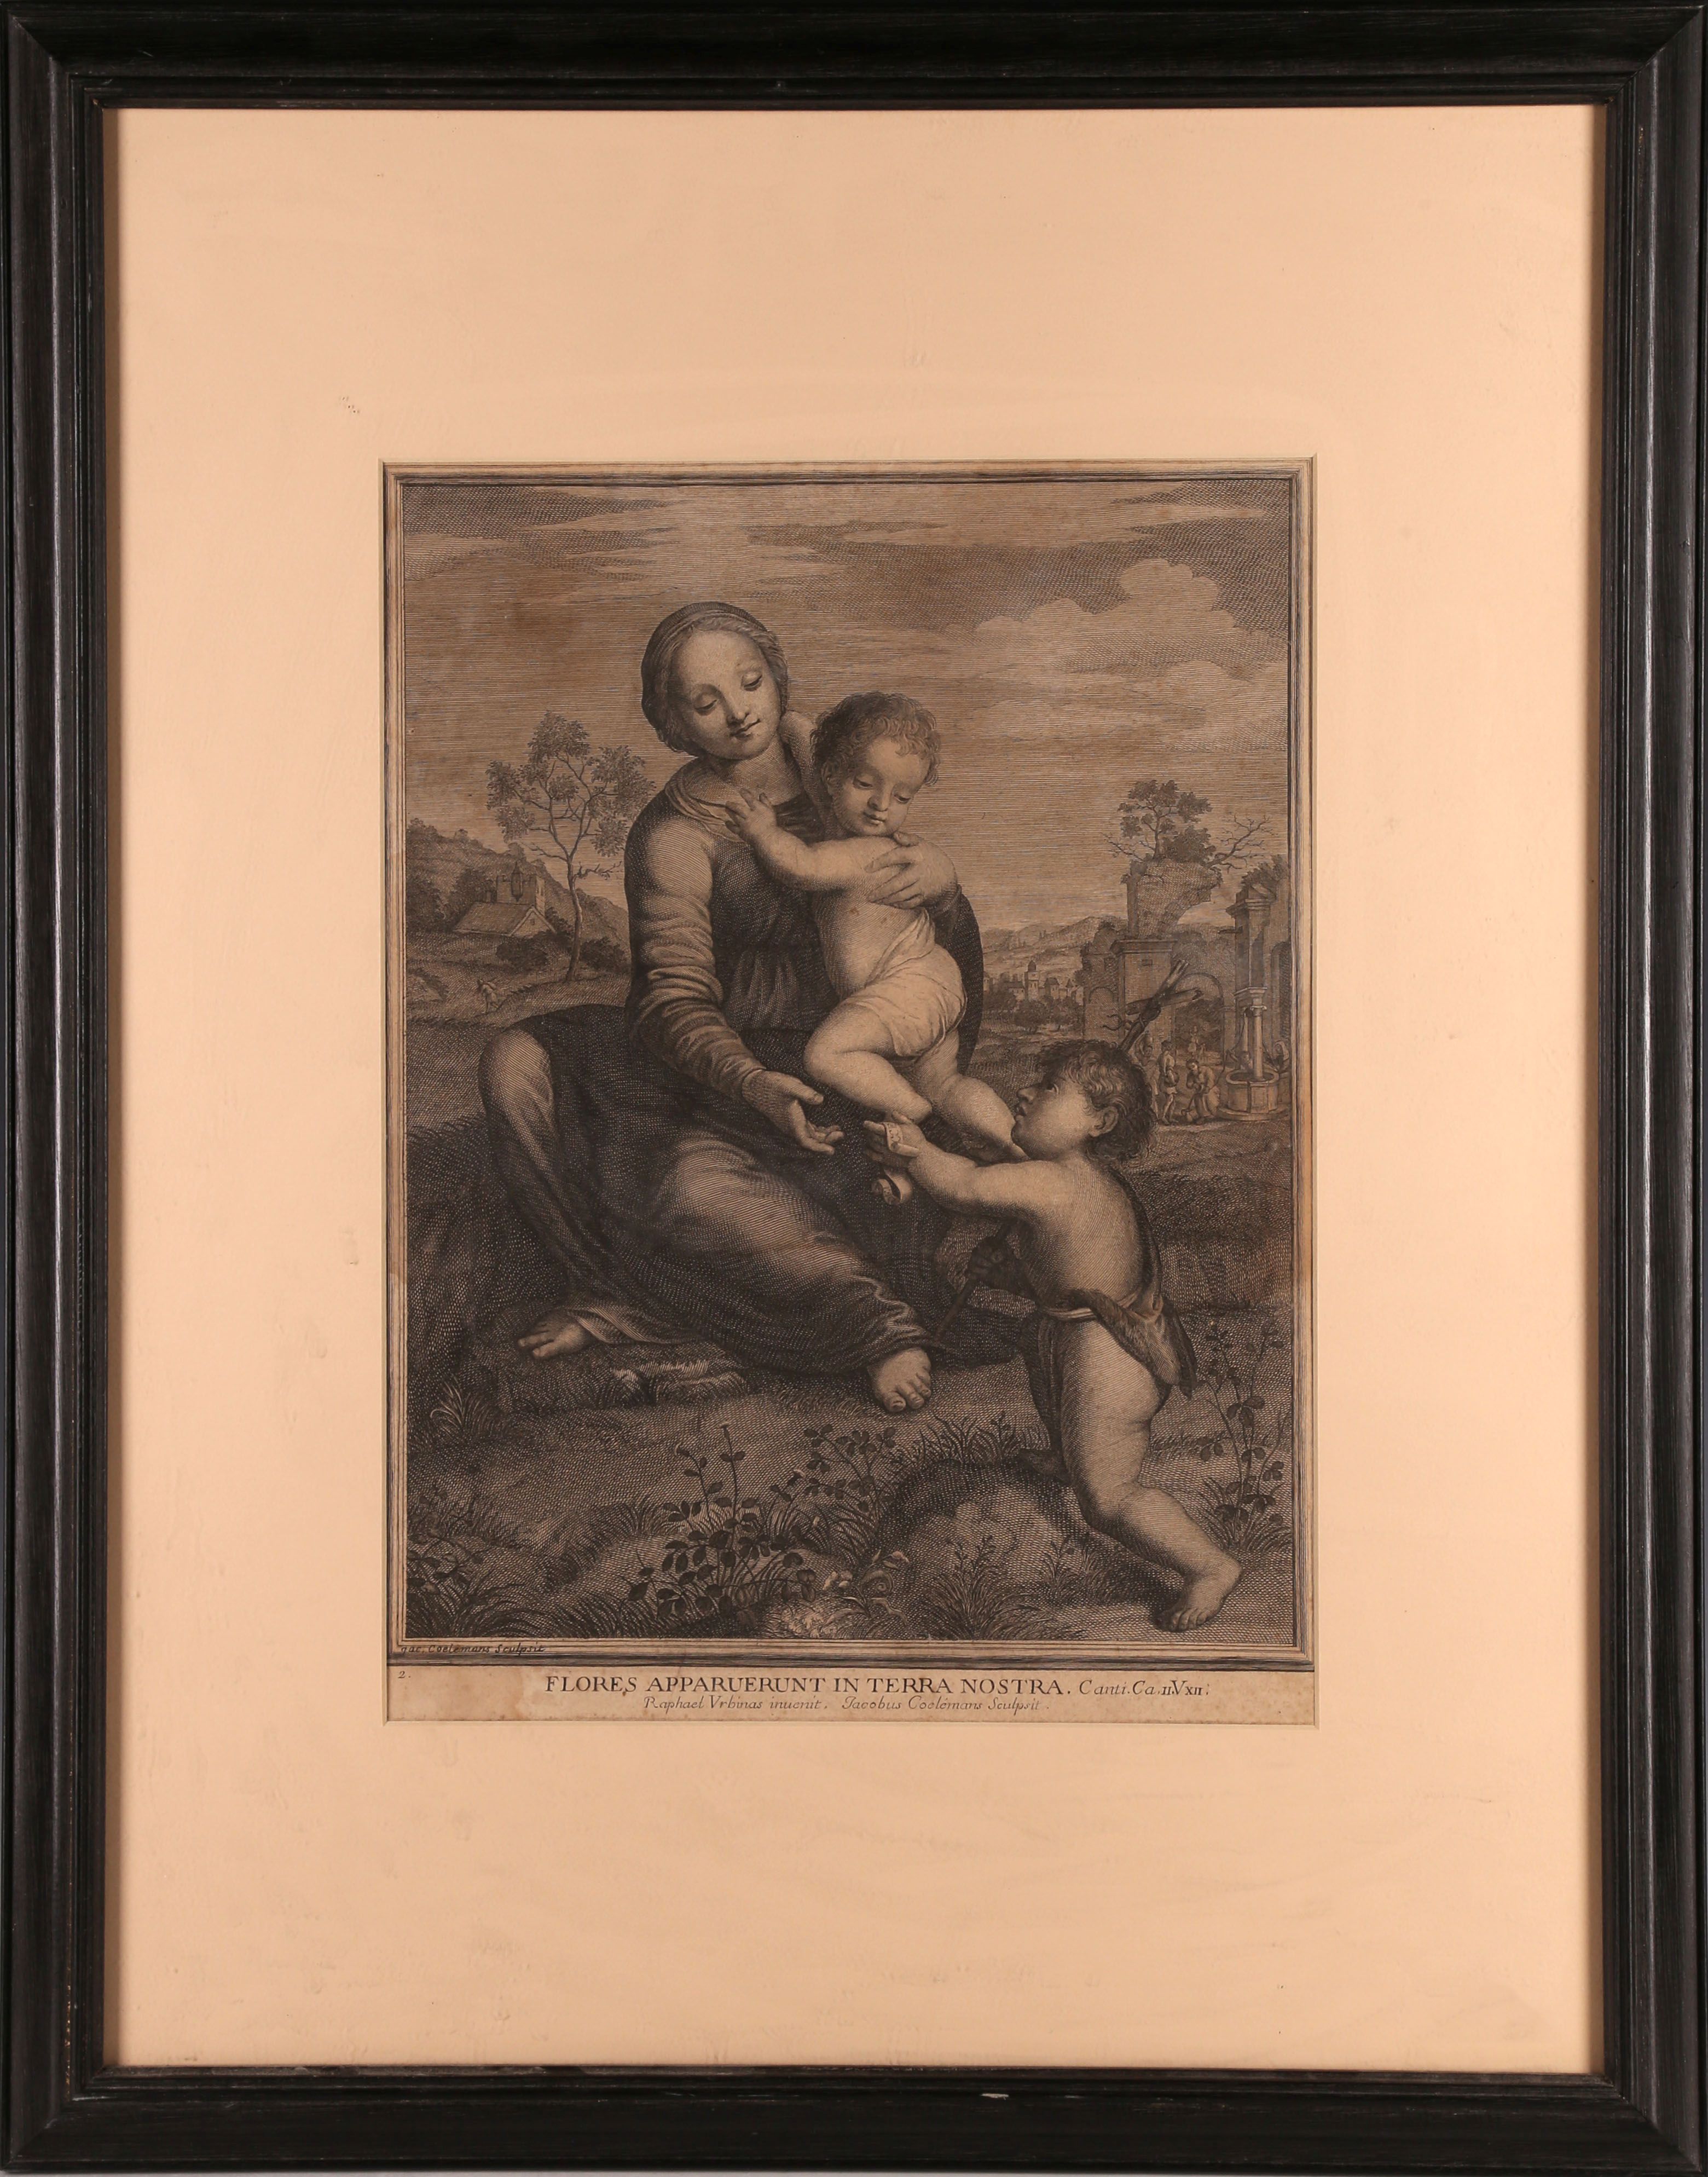 An 18th Century engraving after Raphael by Jacobus Coelemans, titled 'Flores Apparuerunt in Terra